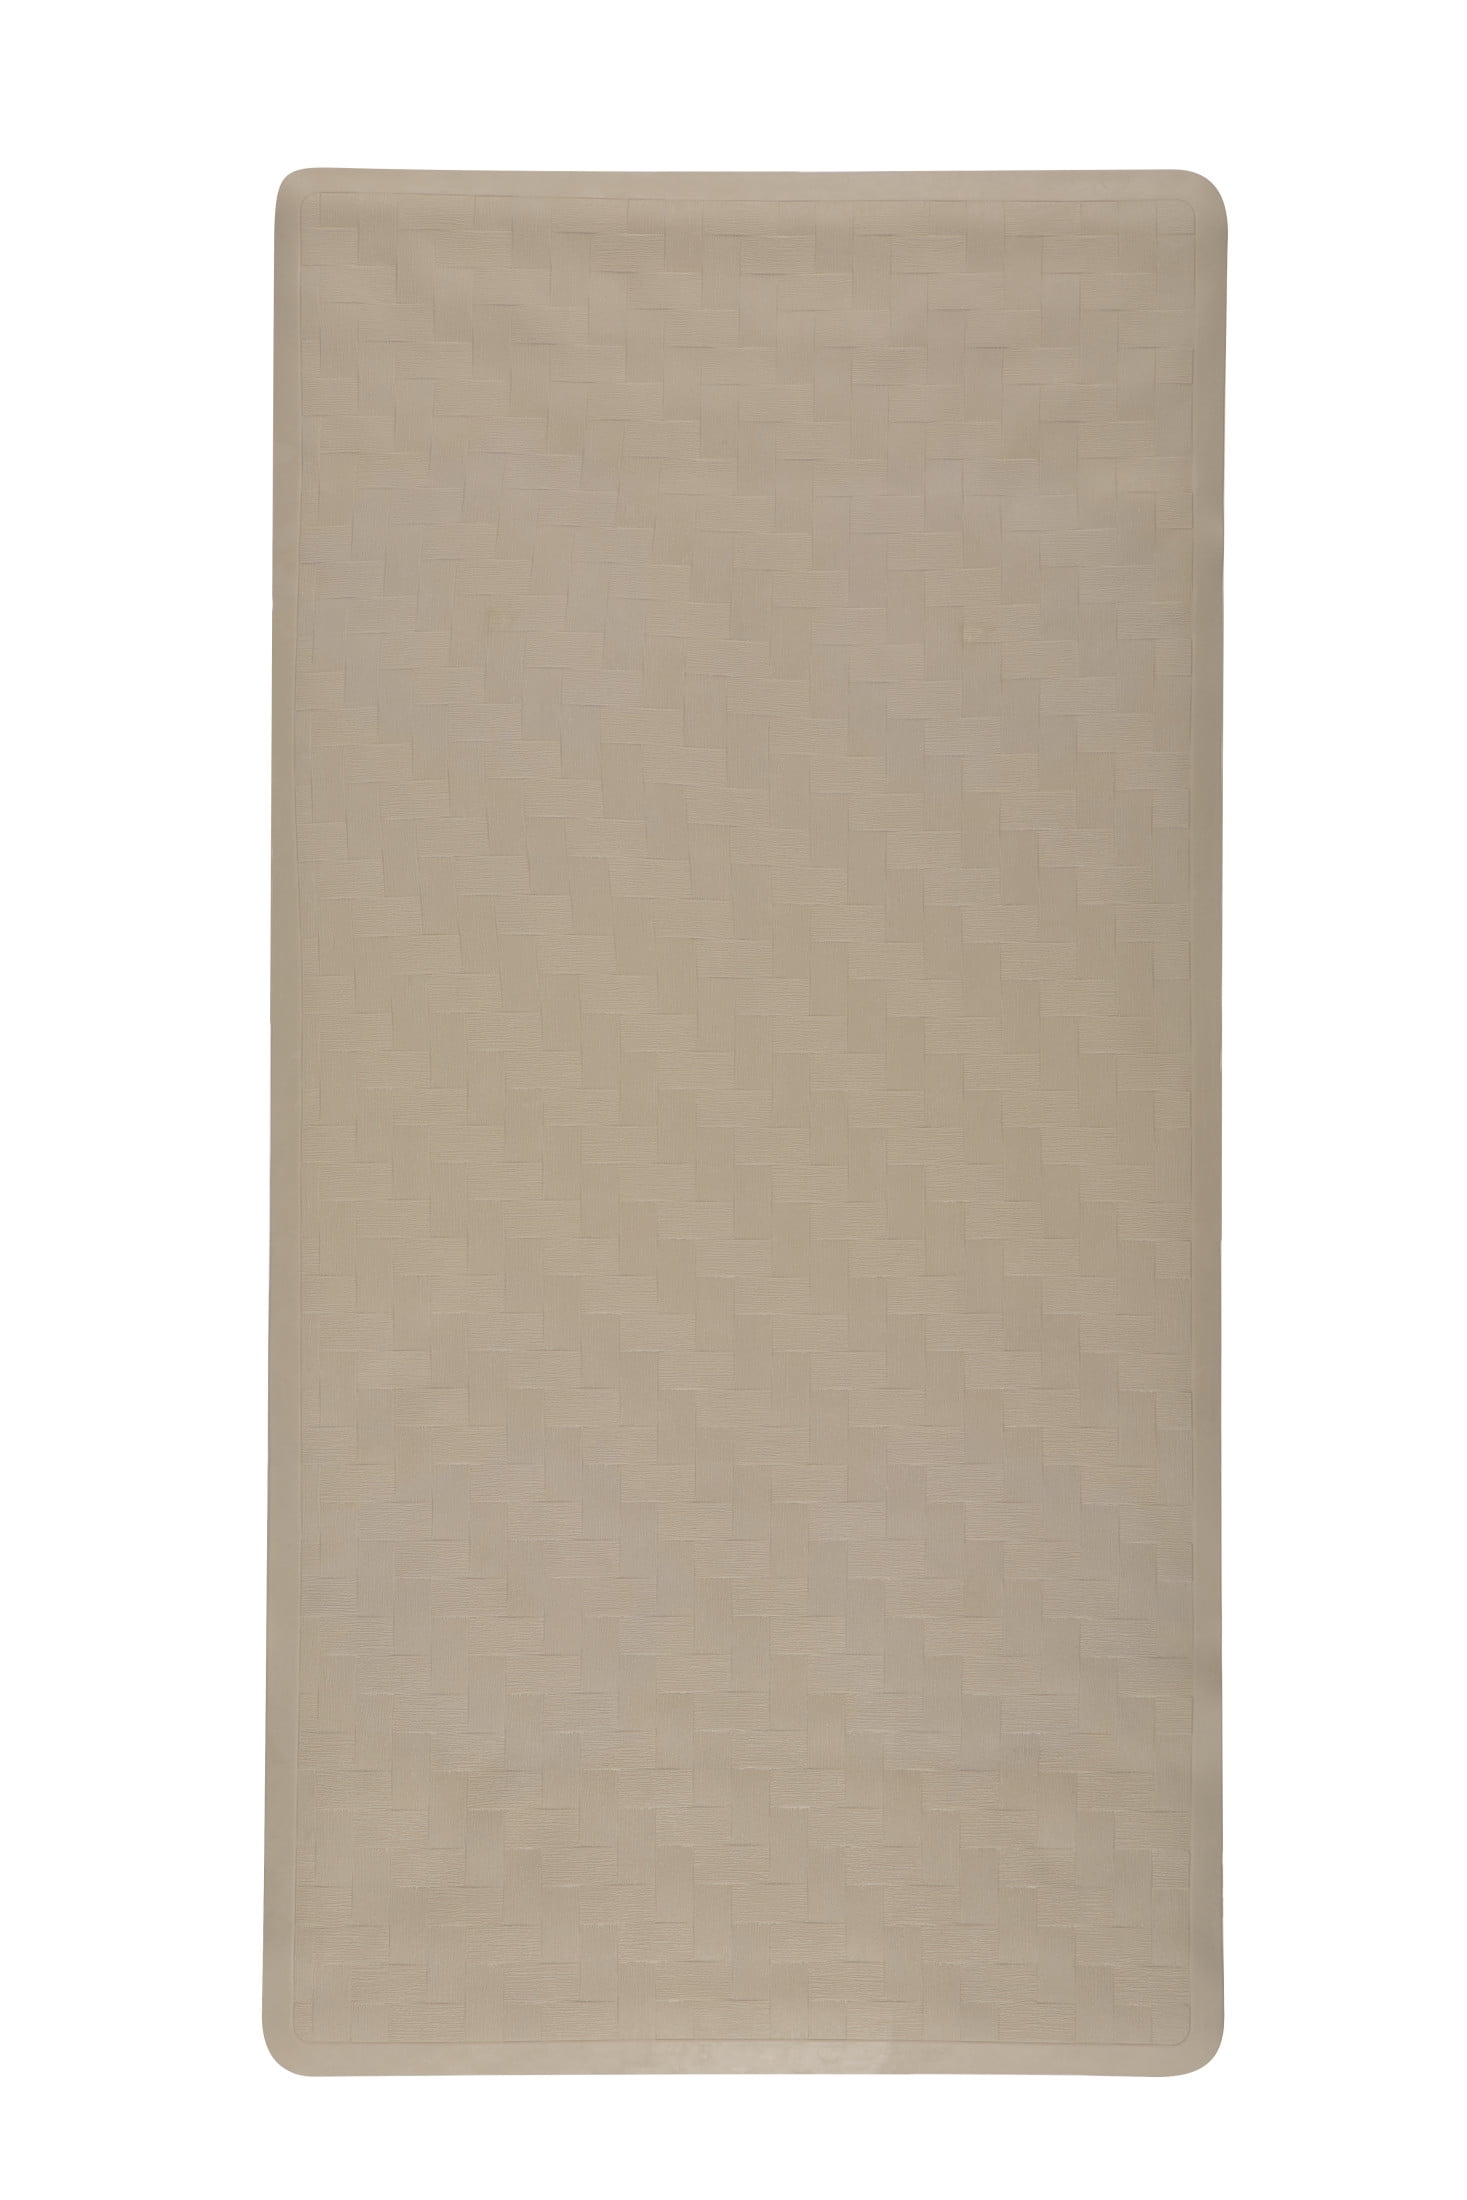 Simply Essential™ 36 x 18 Microban® Shower Mat - White, 1 ct - Fred Meyer